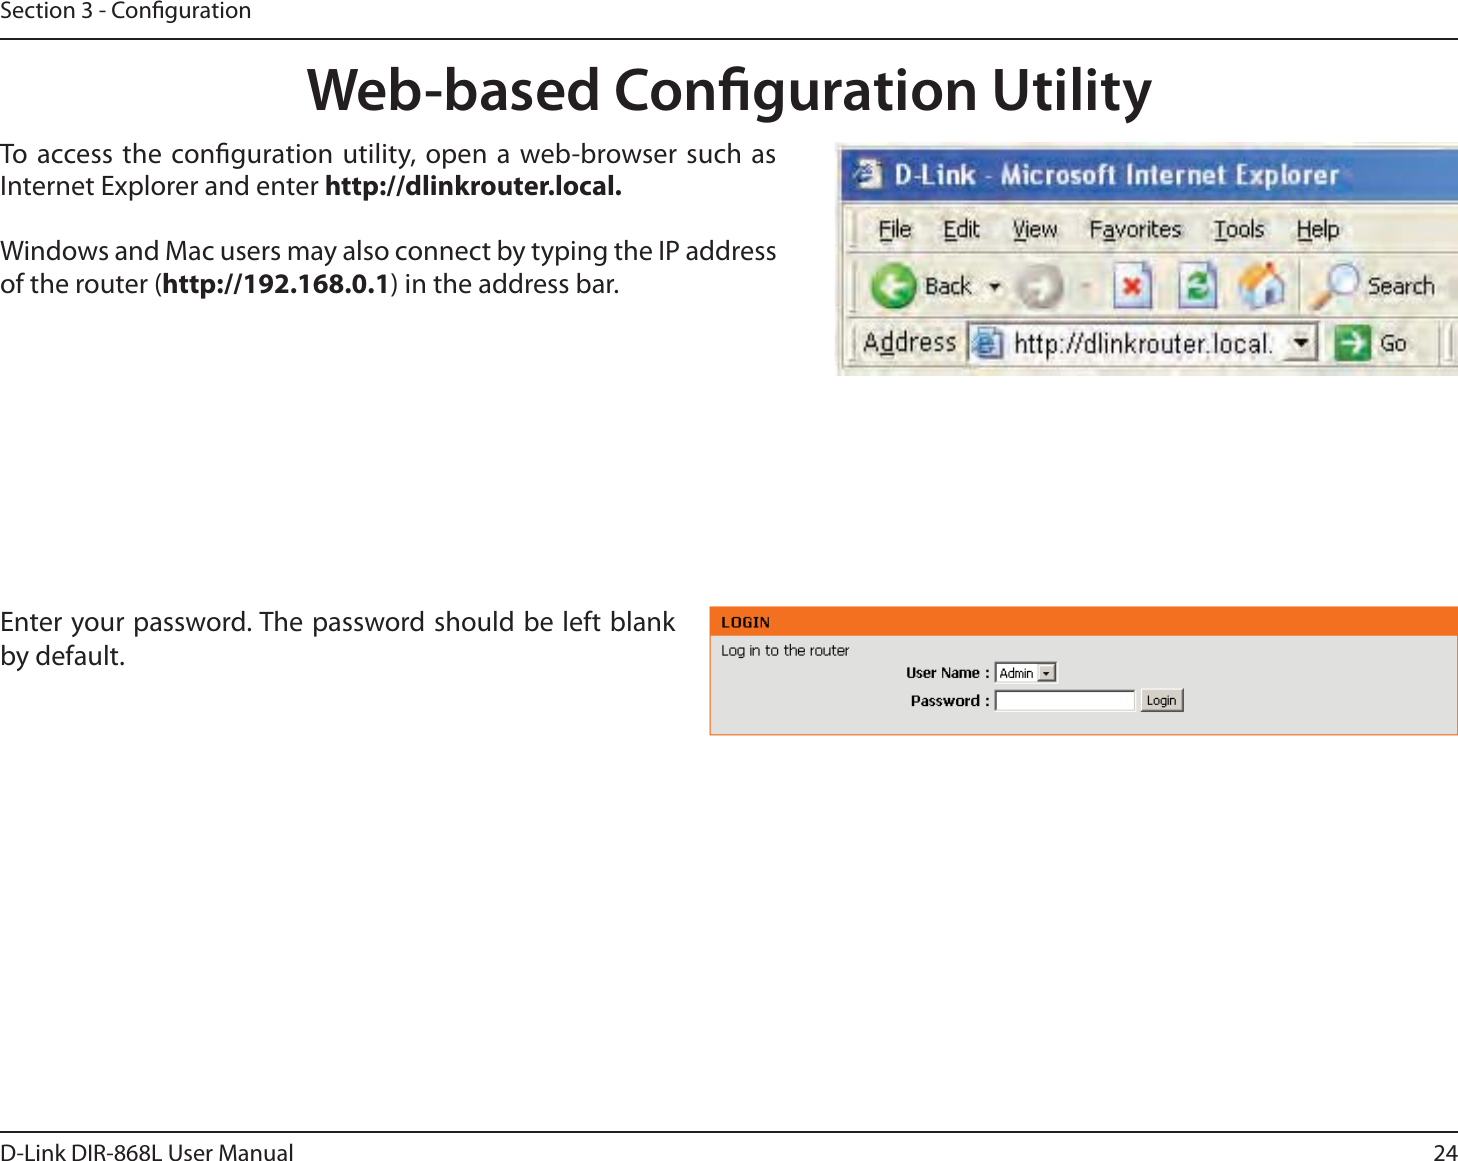 24D-Link DIR-868L User ManualSection 3 - CongurationWeb-based Conguration UtilityEnter your password. The password should be left blank by default.To access the conguration utility, open a web-browser such as Internet Explorer and enter http://dlinkrouter.local. Windows and Mac users may also connect by typing the IP address of the router (http://192.168.0.1) in the address bar.